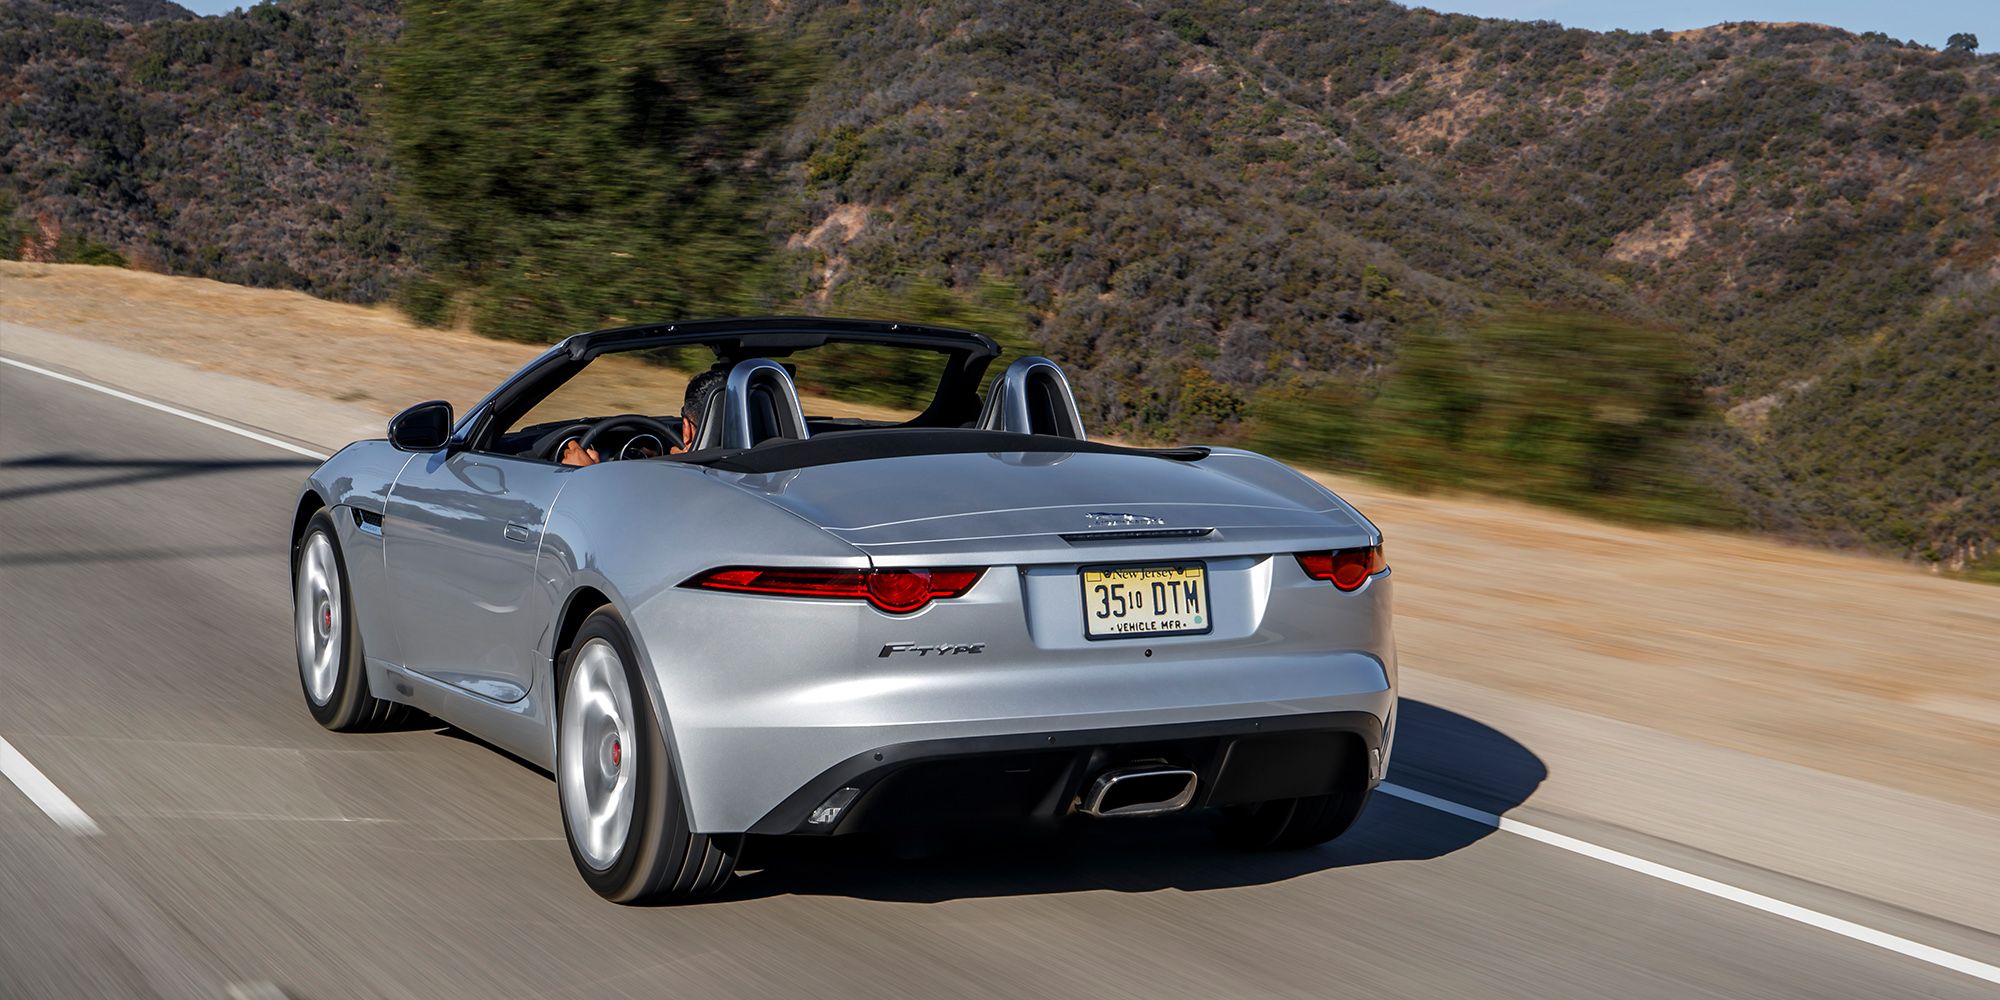 The rear of the F-Type four-cylinder